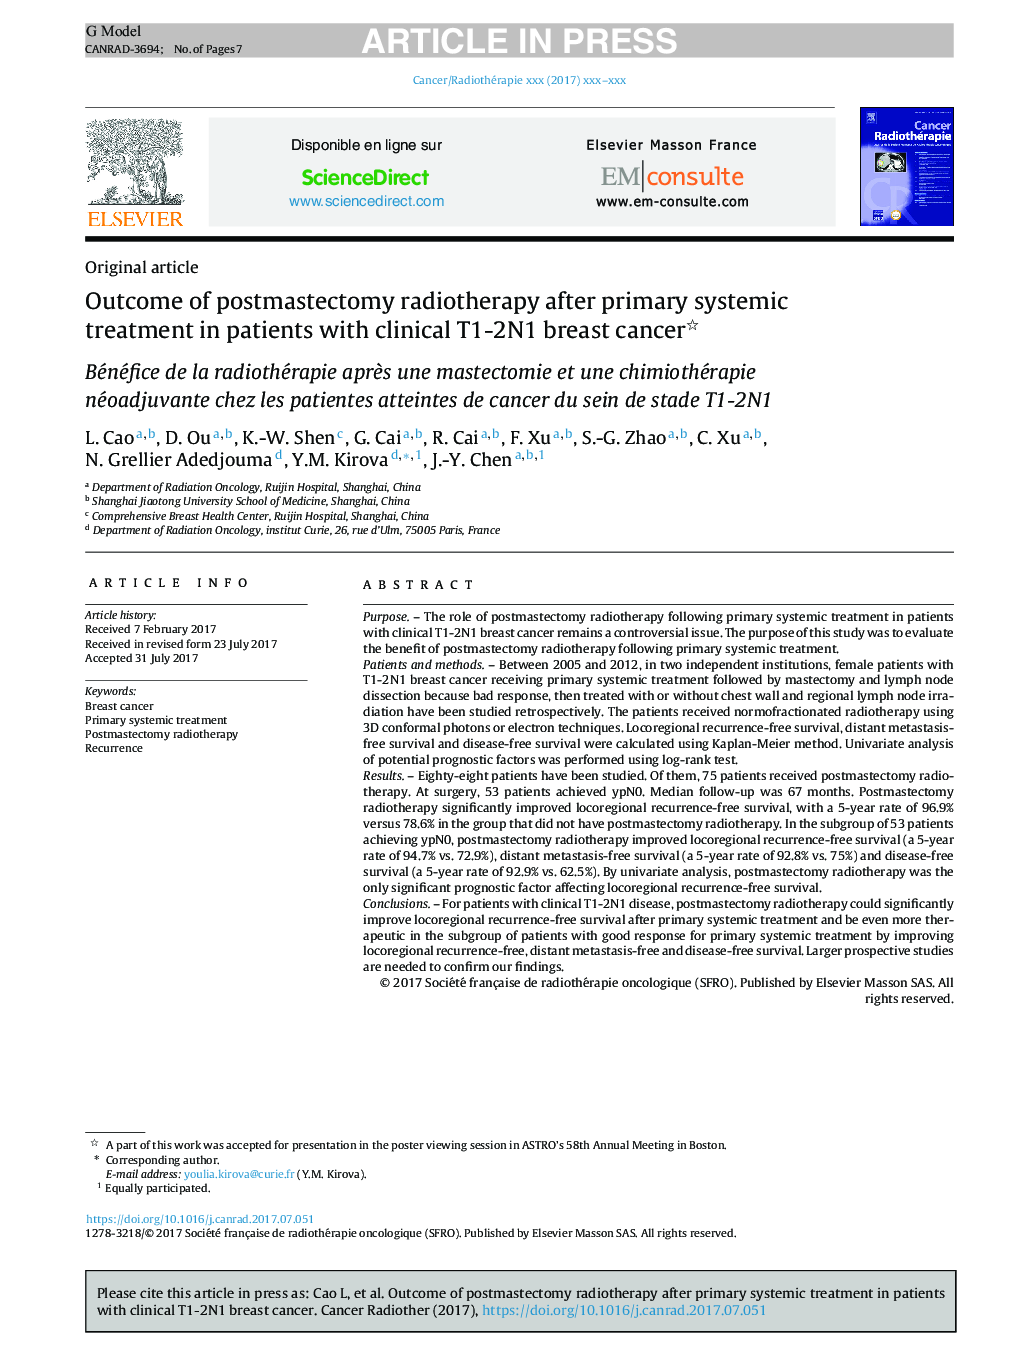 Outcome of postmastectomy radiotherapy after primary systemic treatment in patients with clinical T1-2N1 breast cancer